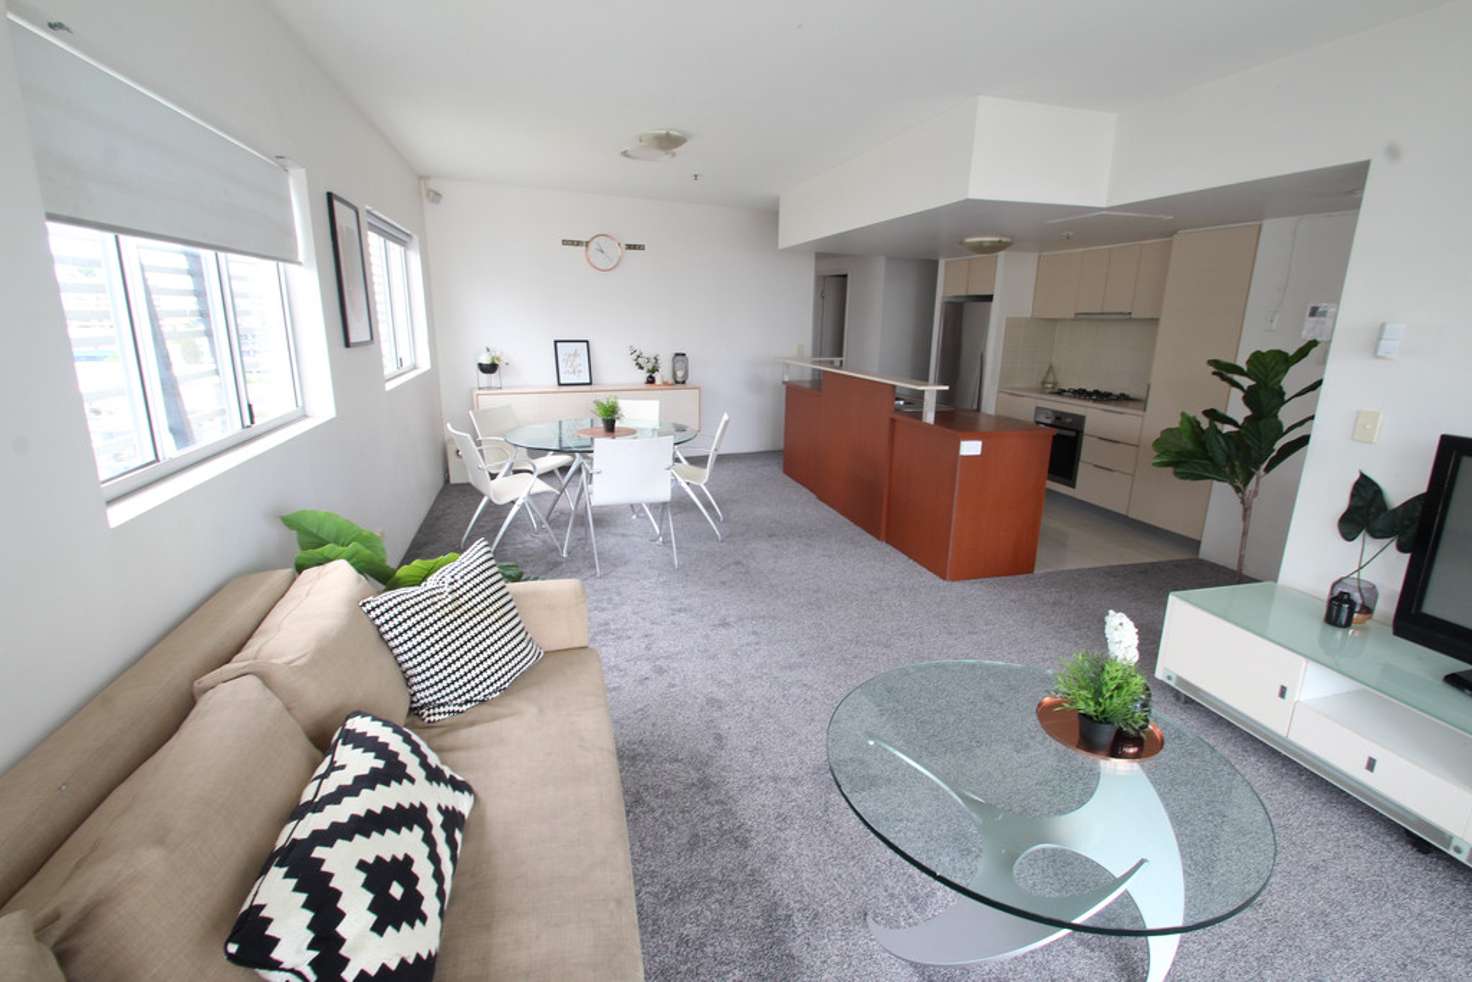 Main view of Homely apartment listing, 190/170 Leichhardt Street, Spring Hill QLD 4000